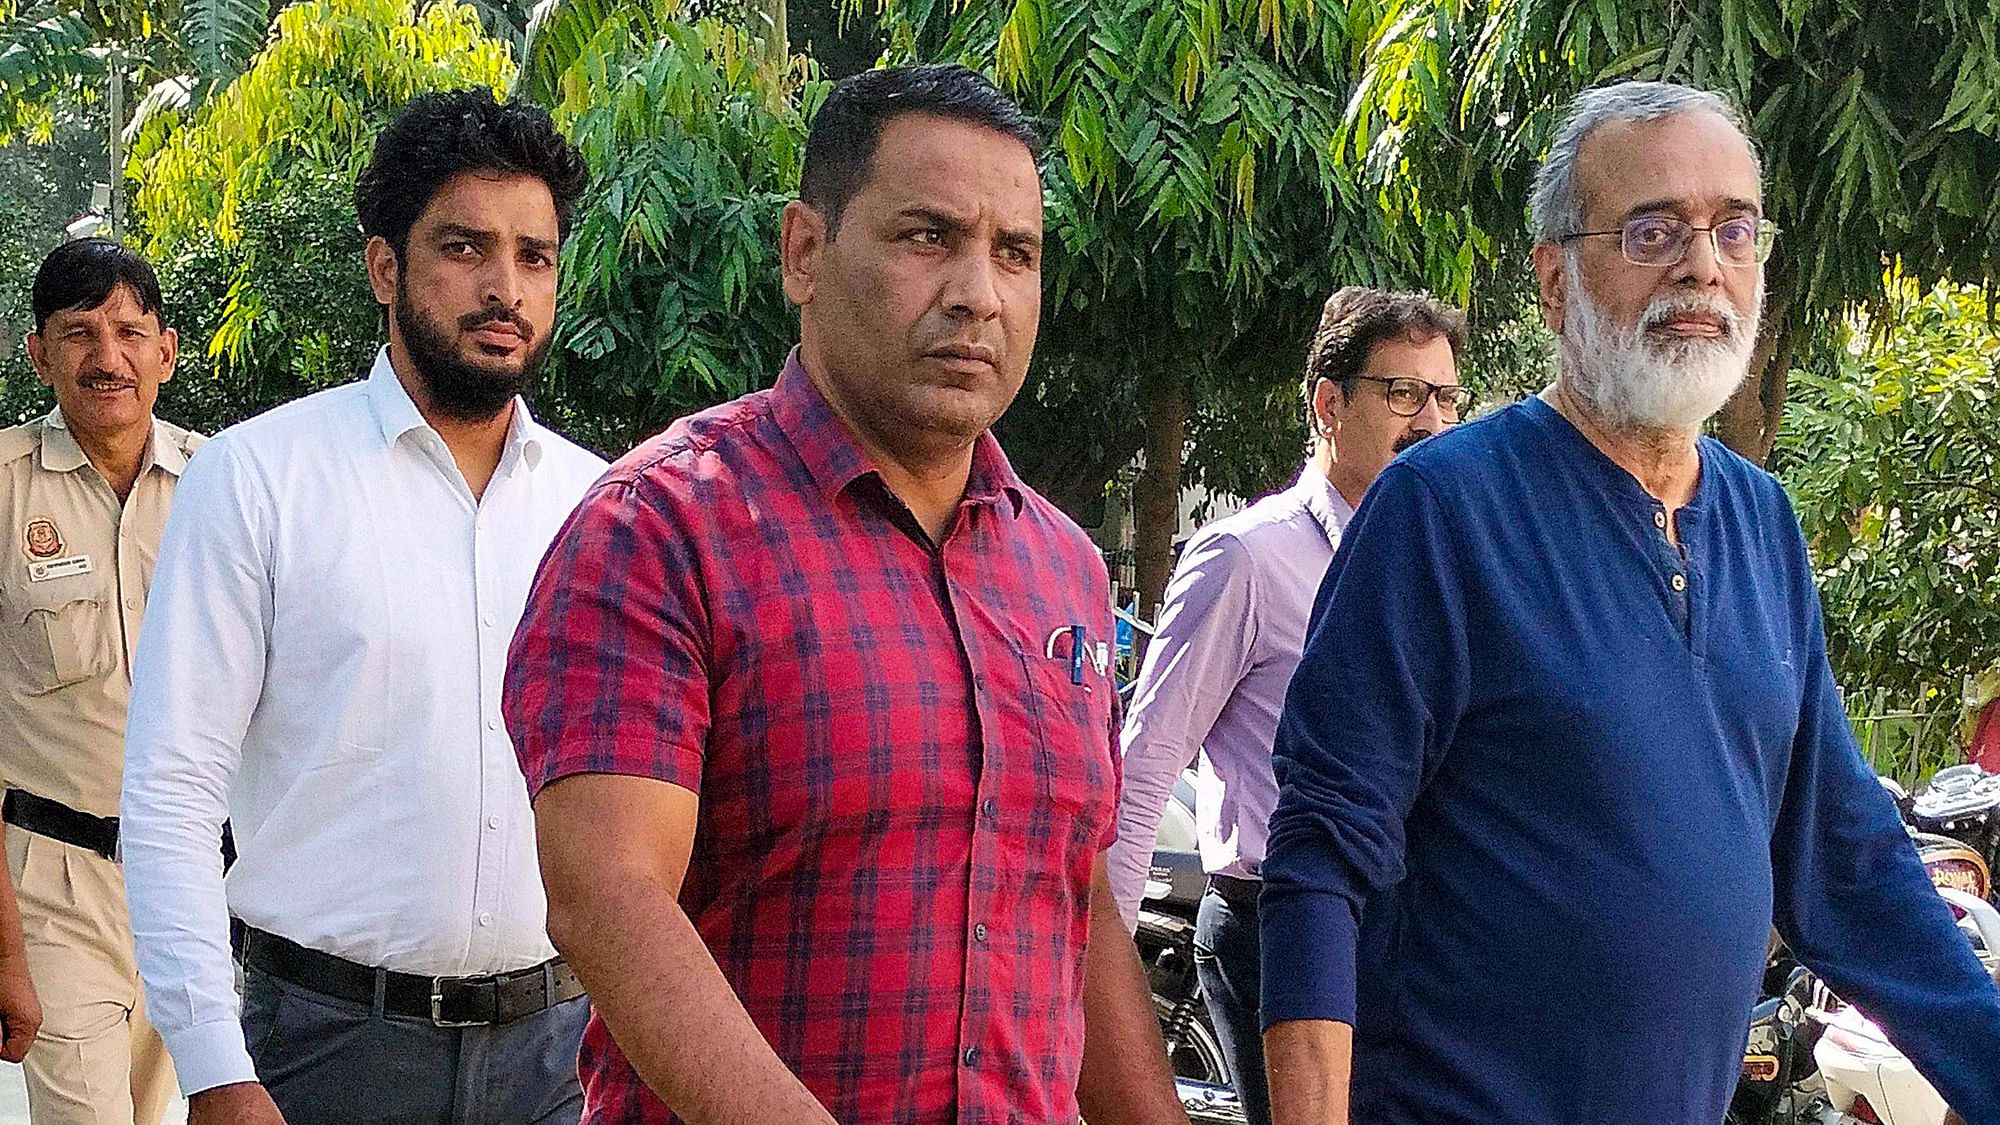 <div class="paragraphs"><p>NewsClick founder Prabir Purkayastha being brought to the Patiala House Court by Delhi Police's Special Cell on Tuesday, 10 October, in a case lodged under anti-terror law UAPA.</p></div>